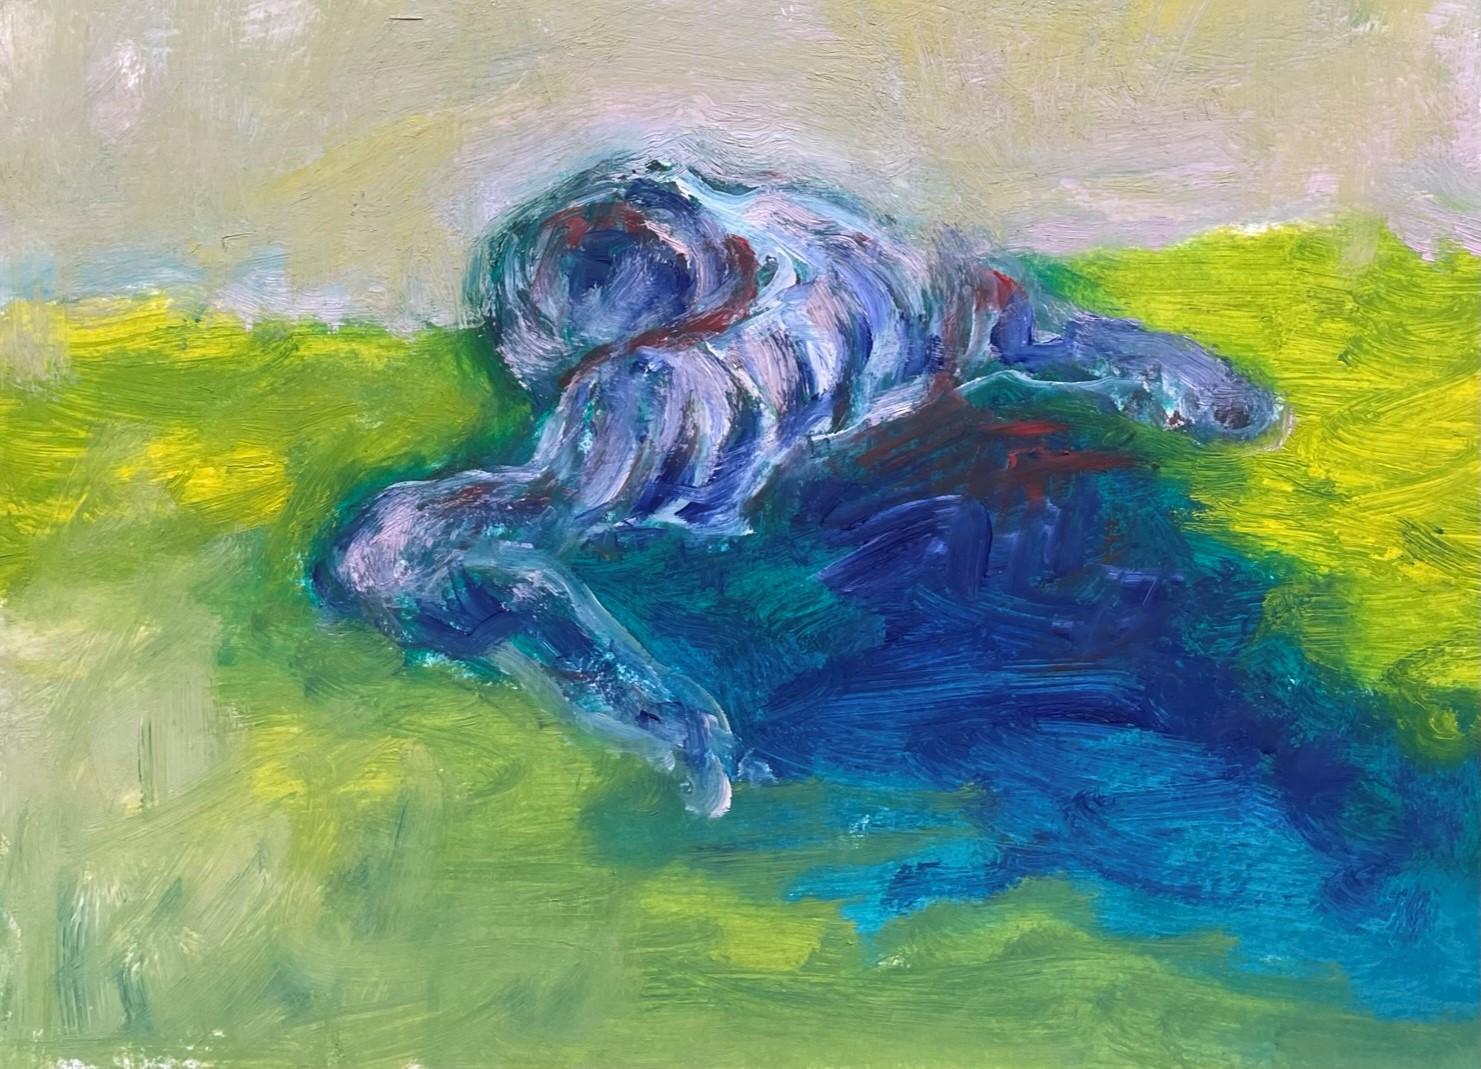 Remains (Body in the Field 12) - Contemporary, Green, Blue, Painting On Paper - Gray Figurative Art by Zsolt Berszán